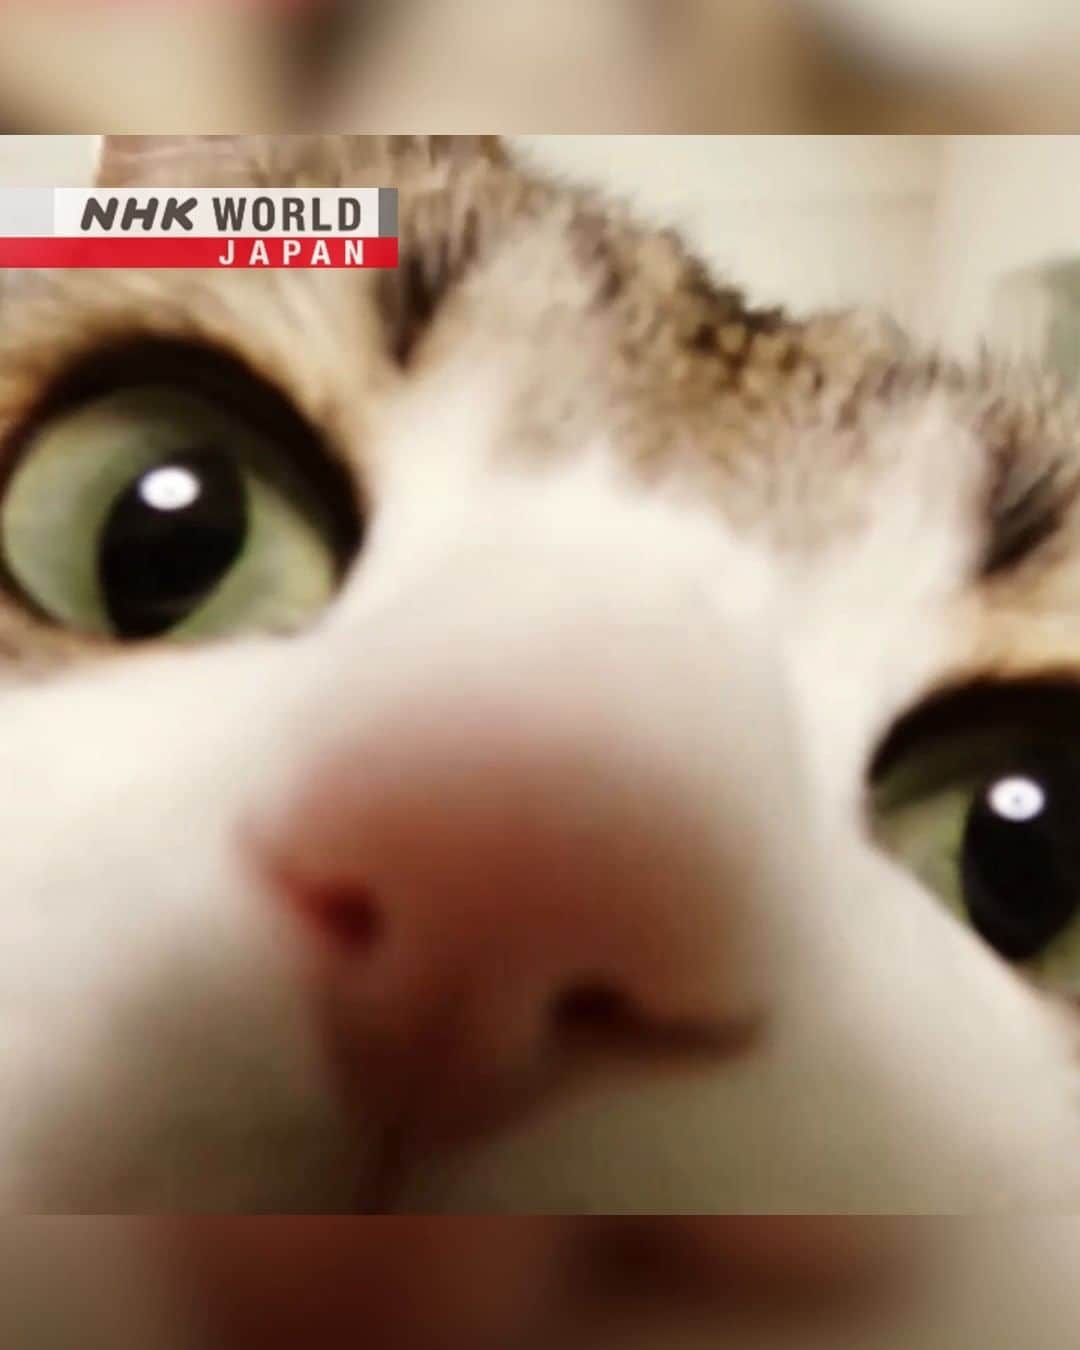 NHK「WORLD-JAPAN」のインスタグラム：「Are you a cat or a dog person?🐱❓🐶  If you said ‘cat’ then you and Japan share a common bond.  More pet cats live here than dogs.😻  With such big numbers, there’s even apartments designed specifically for cats and their owners.  They feature platforms that cats can climb up to, and cat flaps for their feline friends to freely come and go.🐈 . 👉Japanology celebrates 20 years of showcasing Japanese culture! What were your favorite episodes? Share your comments for a chance to be featured in our Japanology 20th Anniversary Special in March! . 👉Discover more about Japan｜Watch｜Japanology｜Free On Demand｜NHK WORLD-JAPAN website.👀 . 👉Tap in Stories/Highlights to get there.👆 . 👉See the link in our bio for more on the latest from Japan. . 👉If we’re on your Favorites list you won’t miss a post. . . #猫 #neko #cat #catlovers #japancat #catsofinstagram #catagram #meow #catvideo #cats #japanesecats #coolcat #cathouse #kittycat #cutecat #visitjapan #discoverjapan #hiddenjapan #nhkworldjapan #japan」